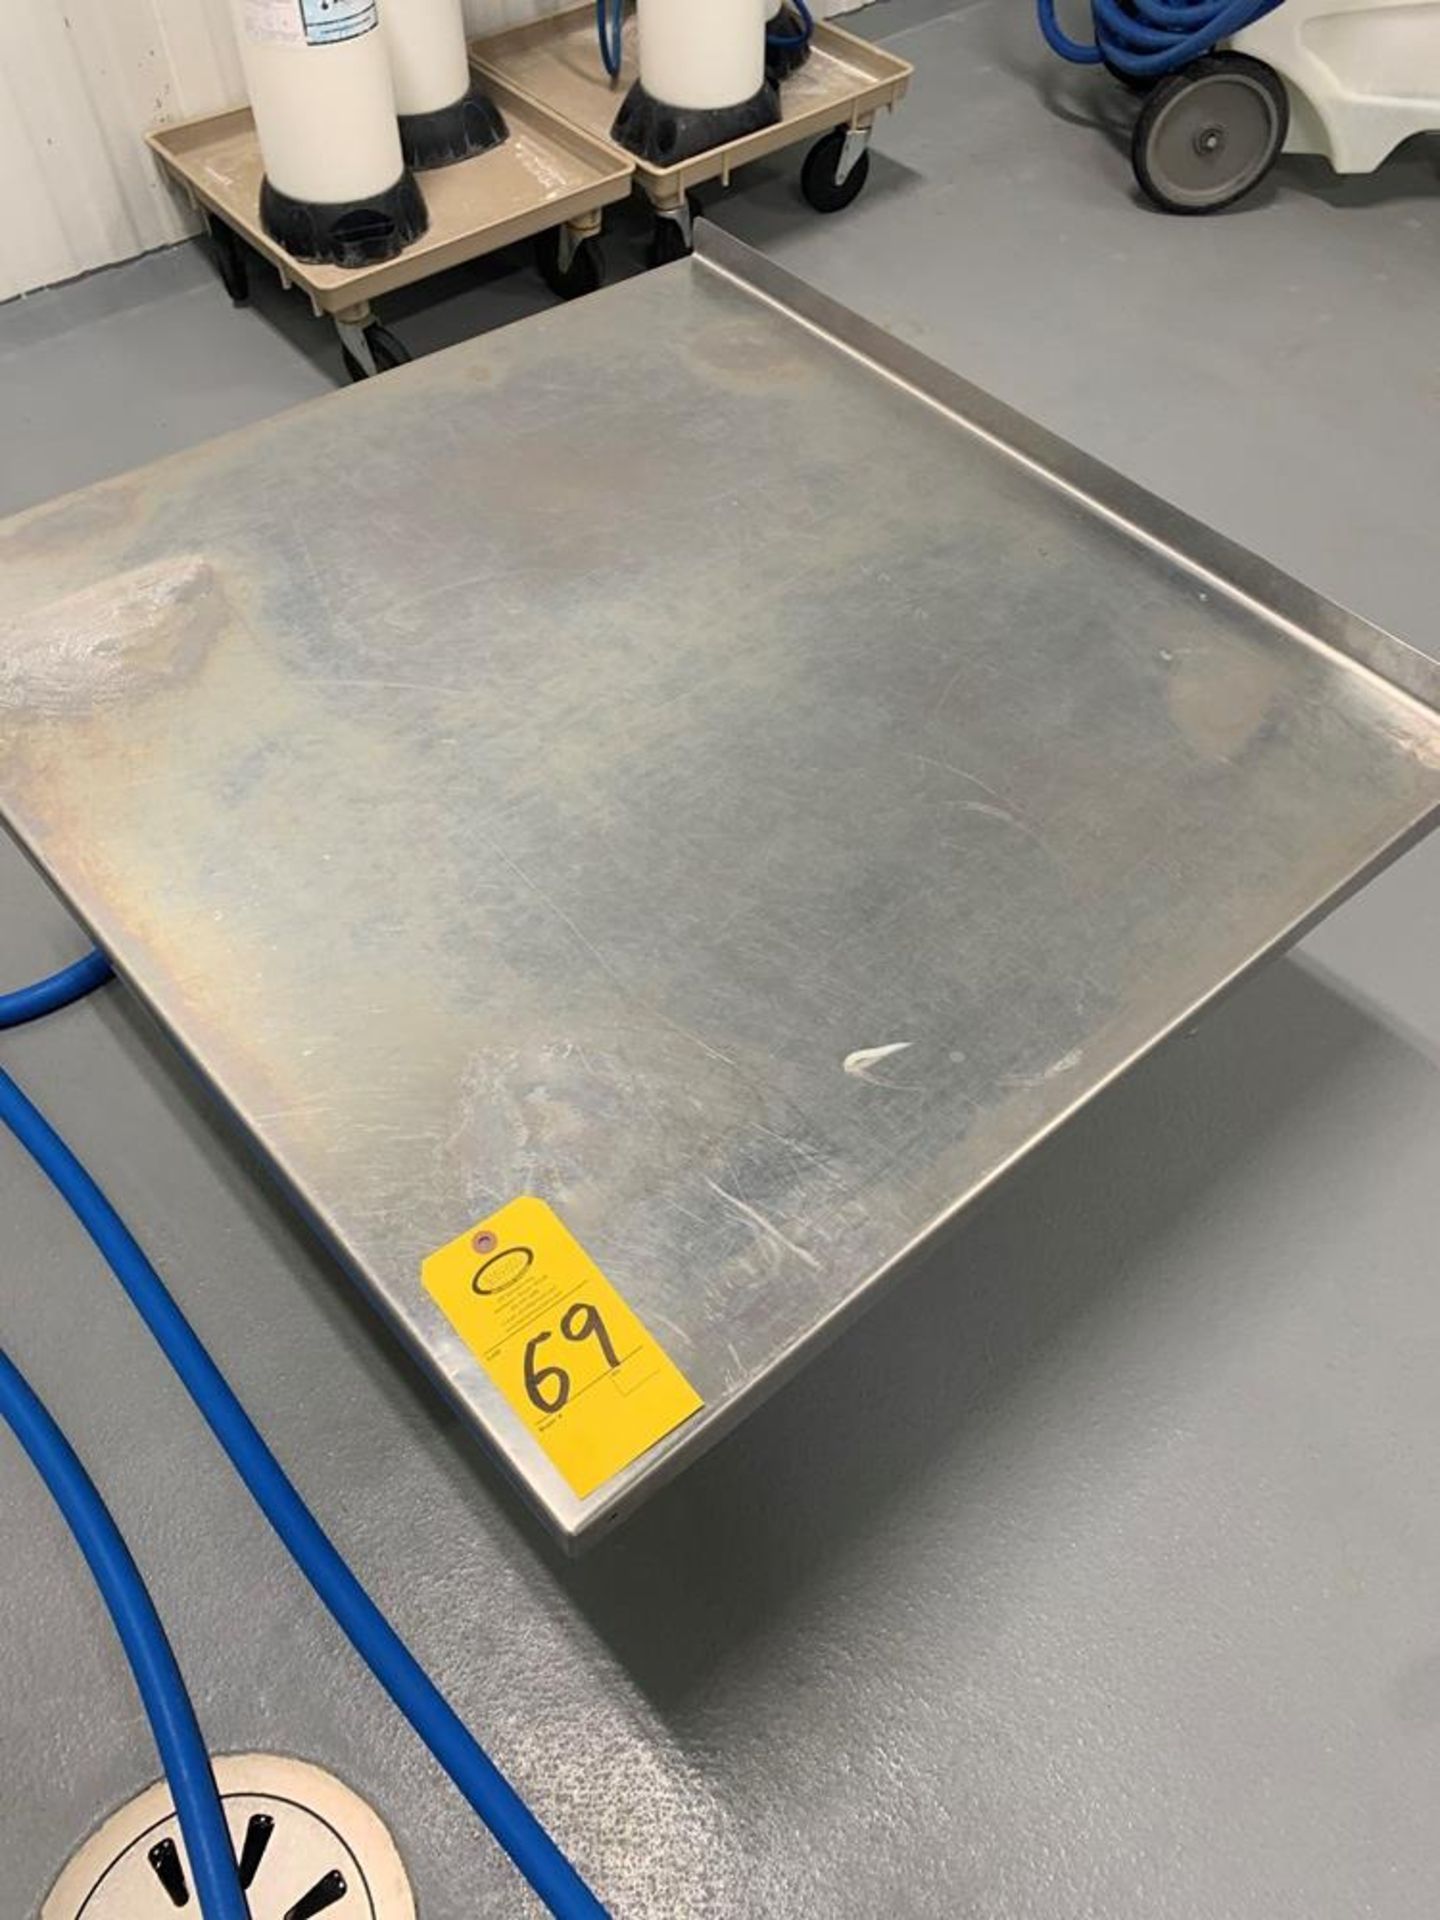 Stainless Steel Equipment Table with bottom shelf, 35" X 36" X 18" - Image 3 of 3